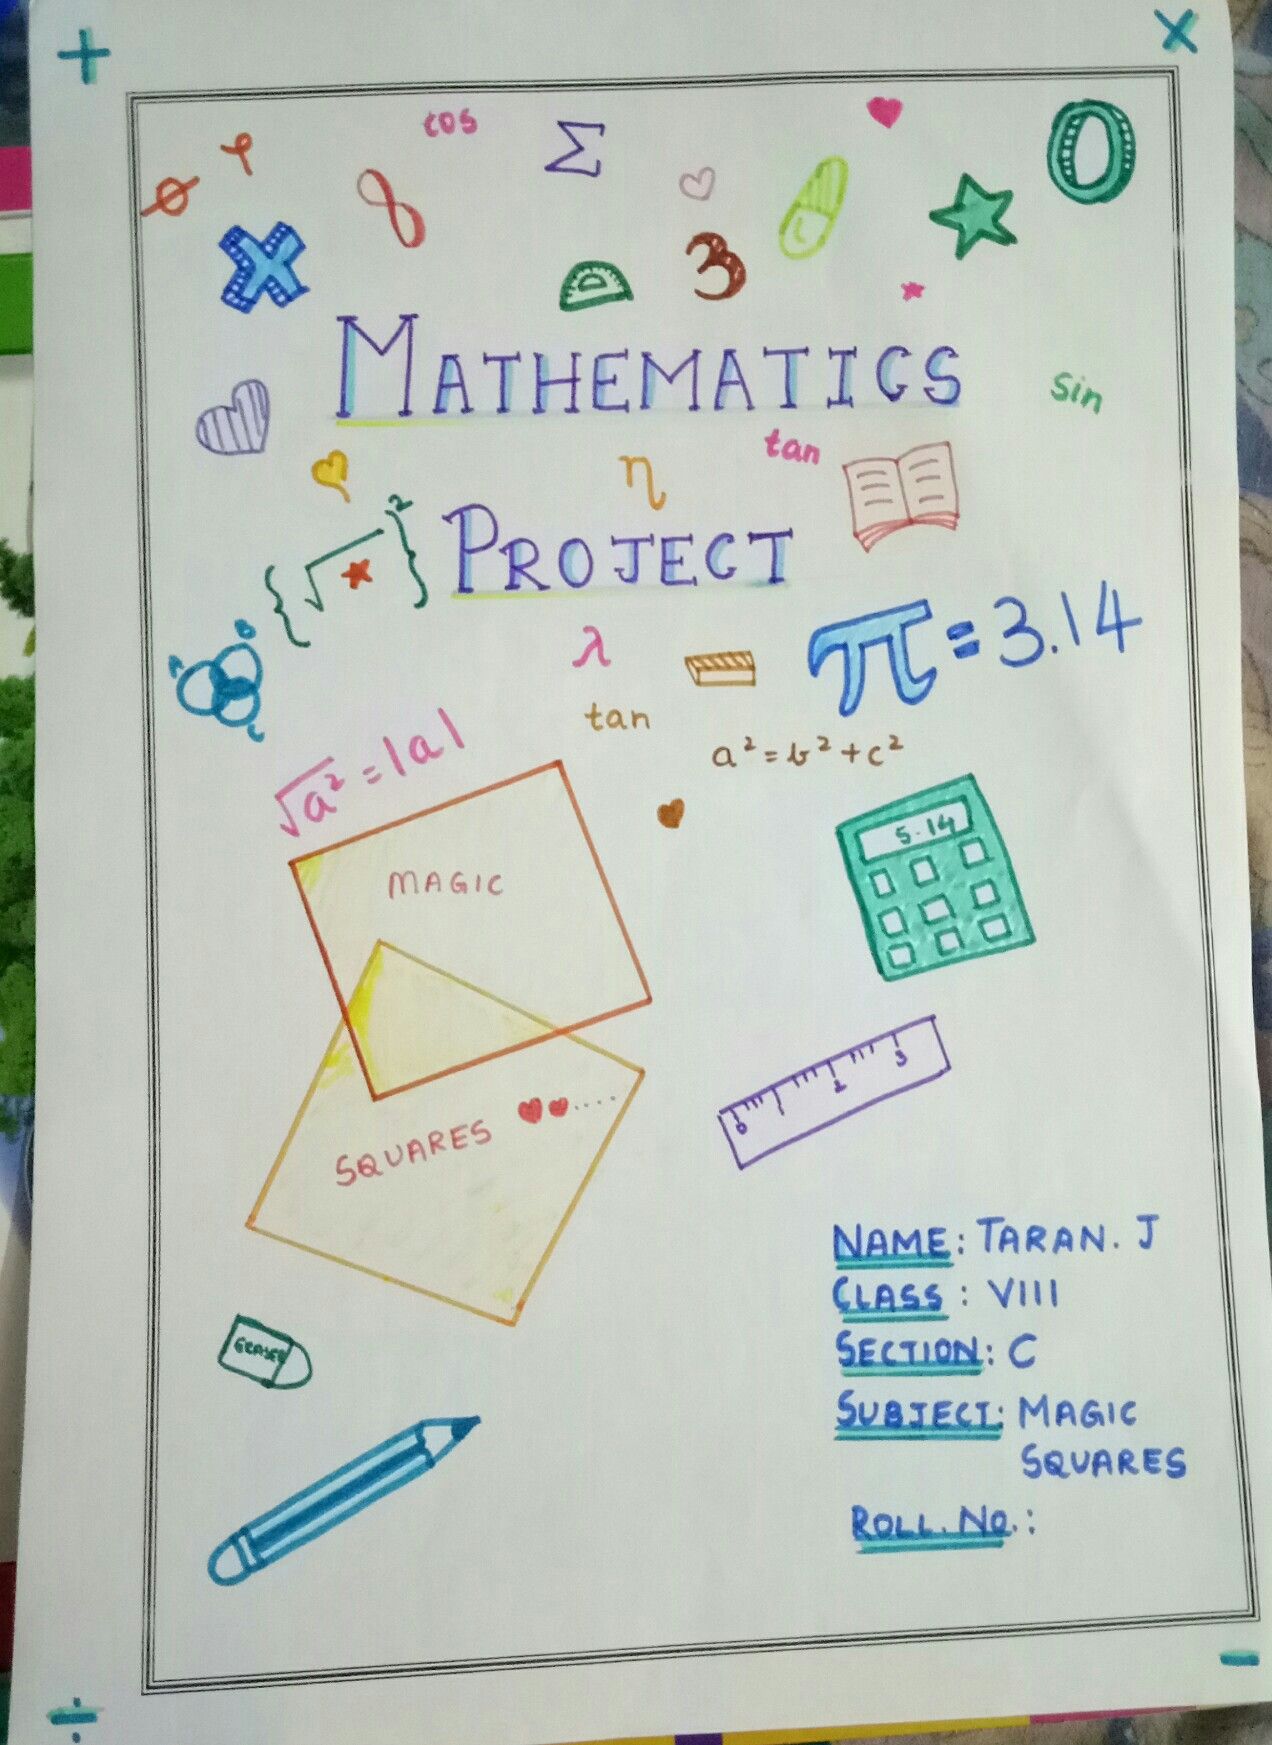 Introduction Of Mathematics Project - Project Introduction Sample